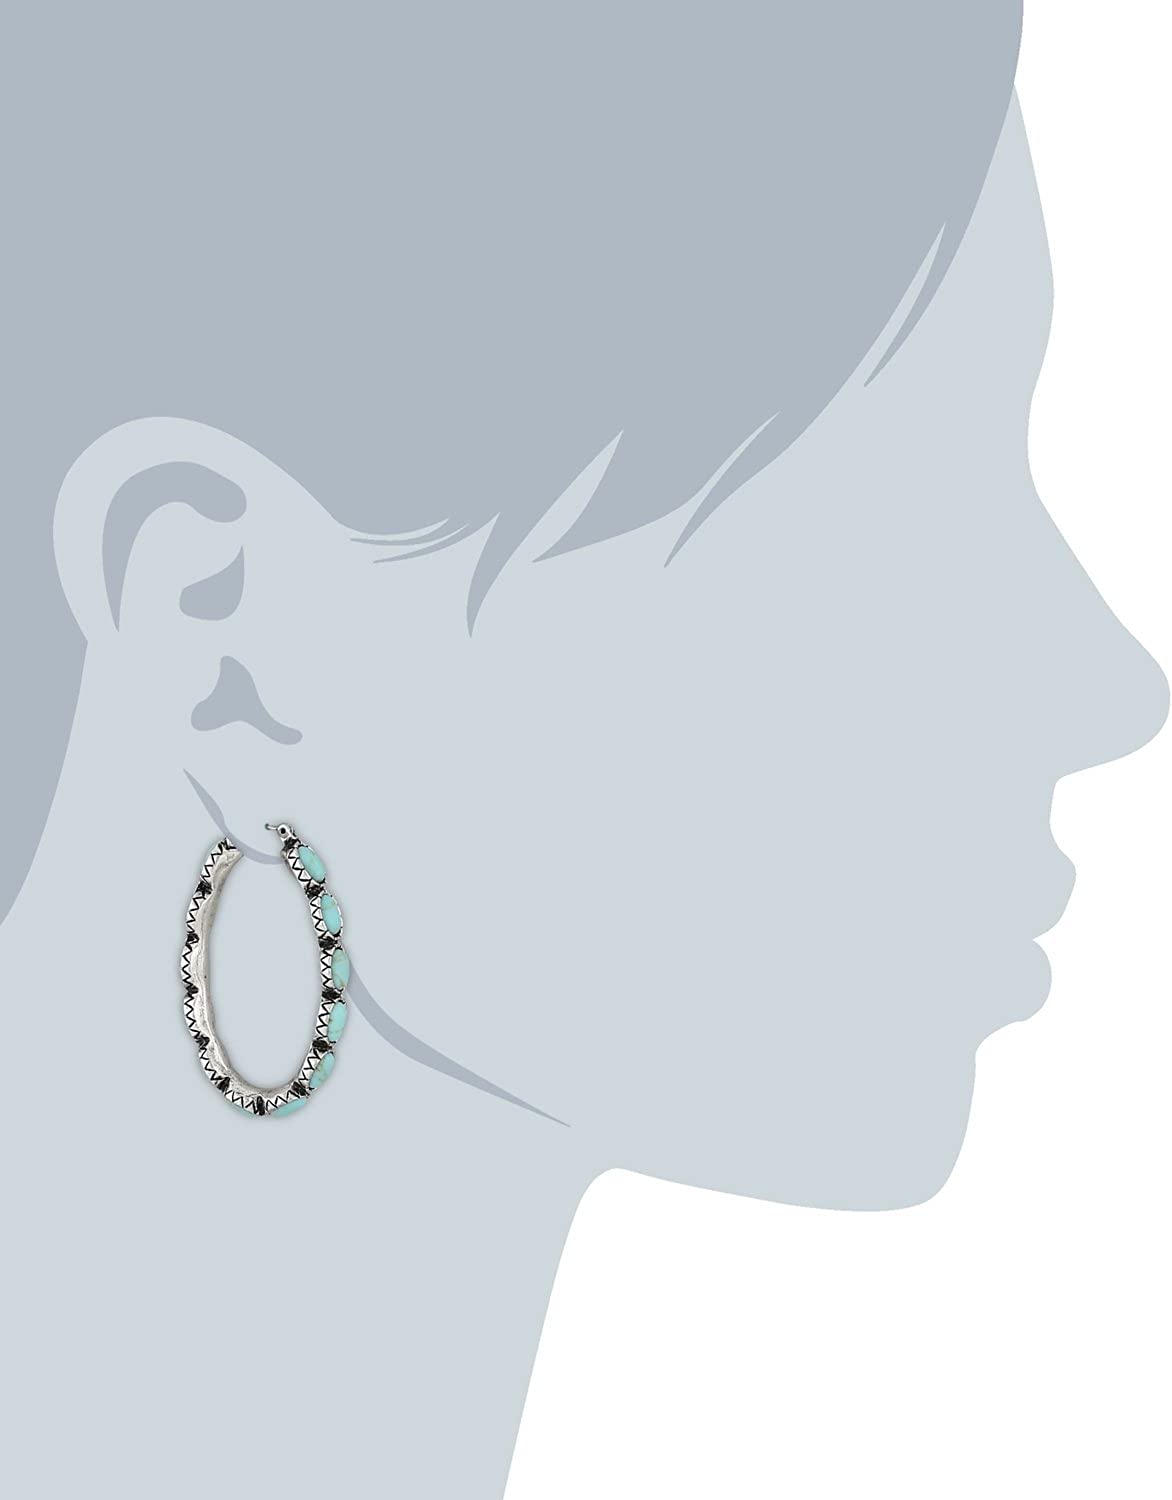 Silver-Tone and Faux Turquoise Hoop Earrings